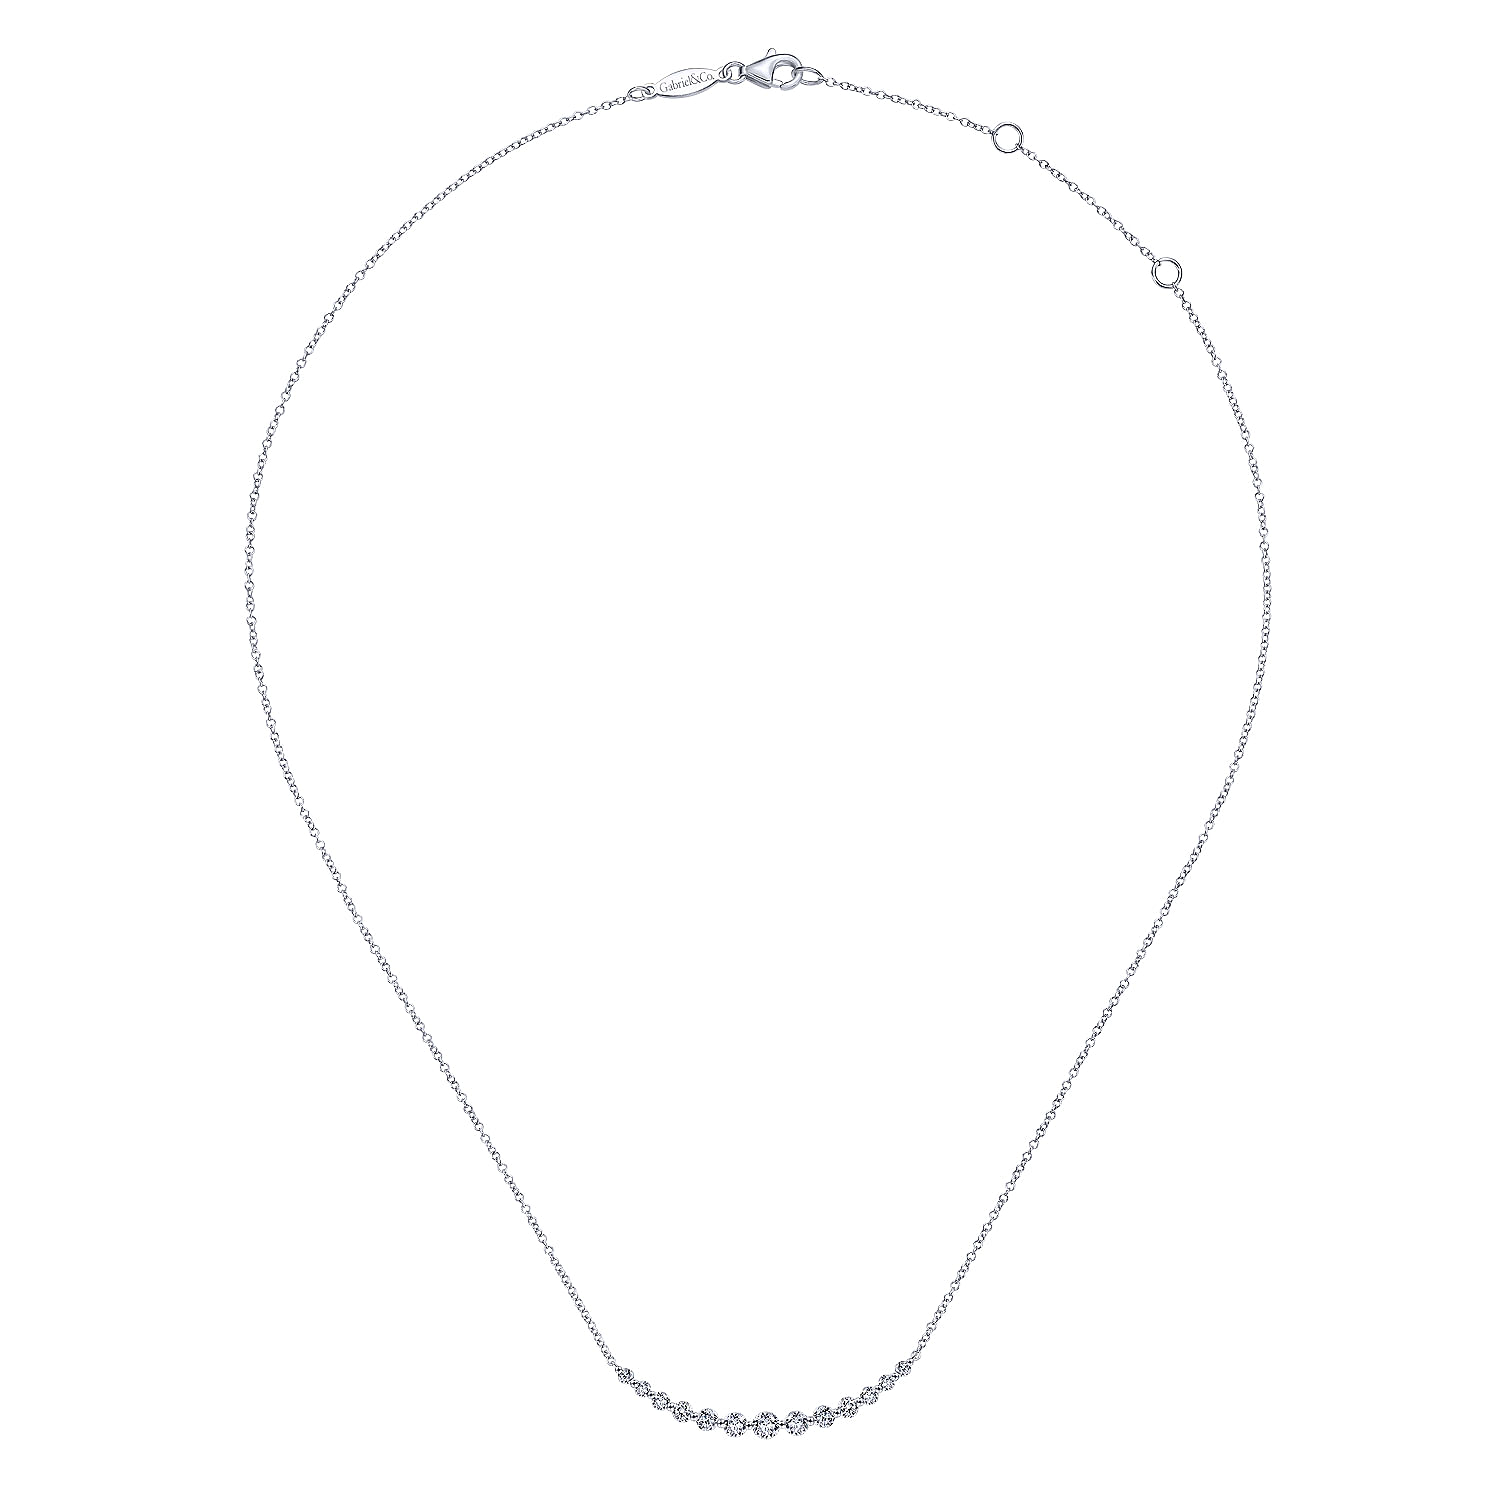 14K White Gold Graduated Round Diamond Curved Bar Necklace